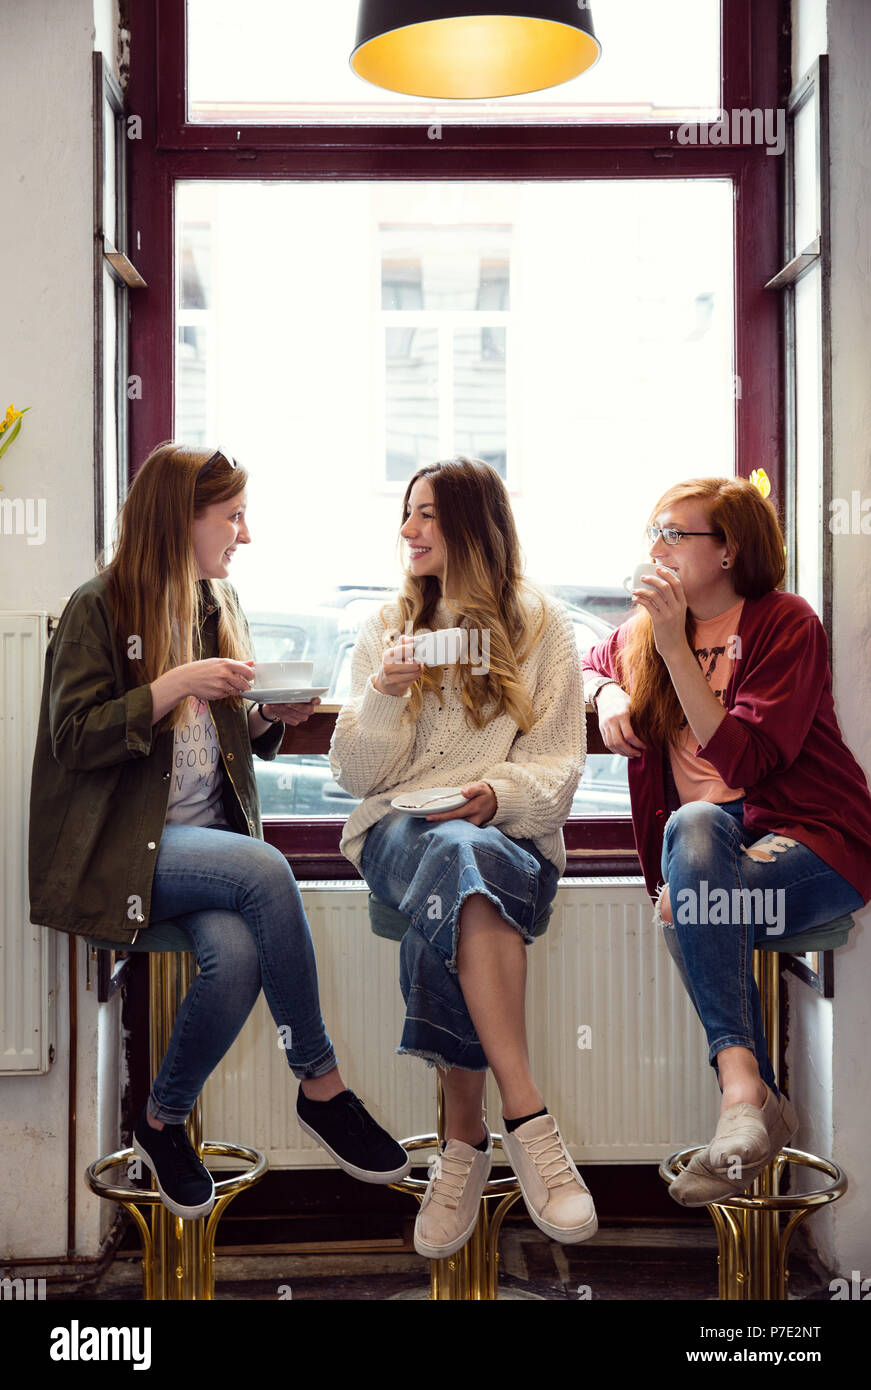 Young women chatting over coffee in cafe Stock Photo